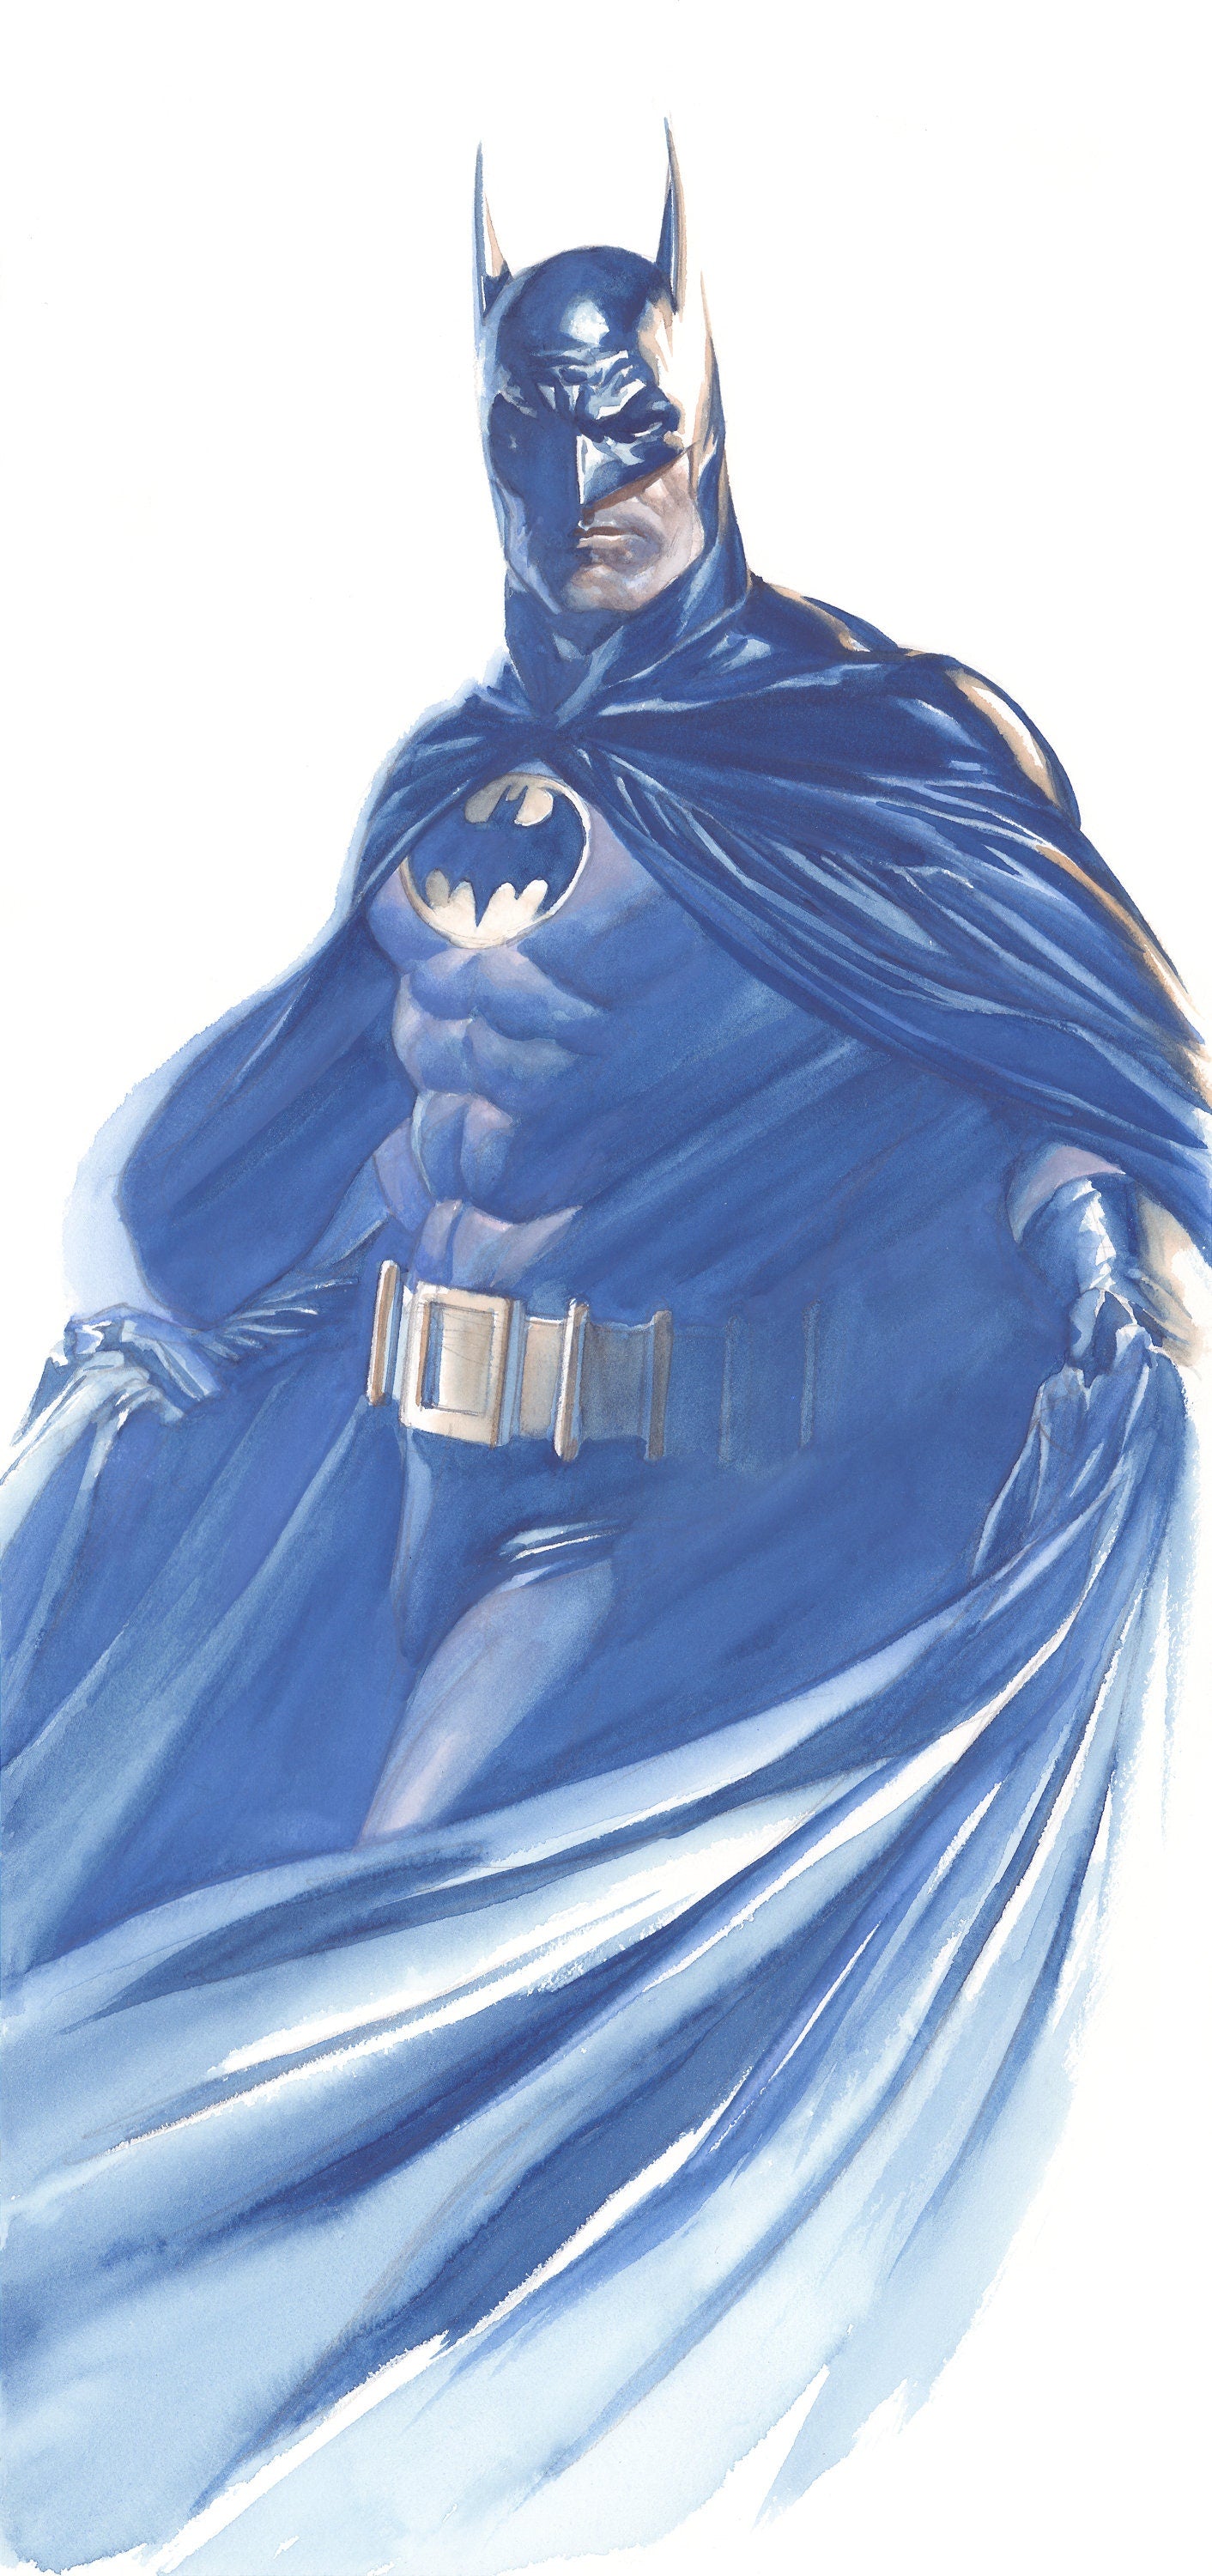 Alex Ross SIGNED Batman Defender of Gotham SDCC 2022 Exclusive Giclee Print on PAPER Limited Edition